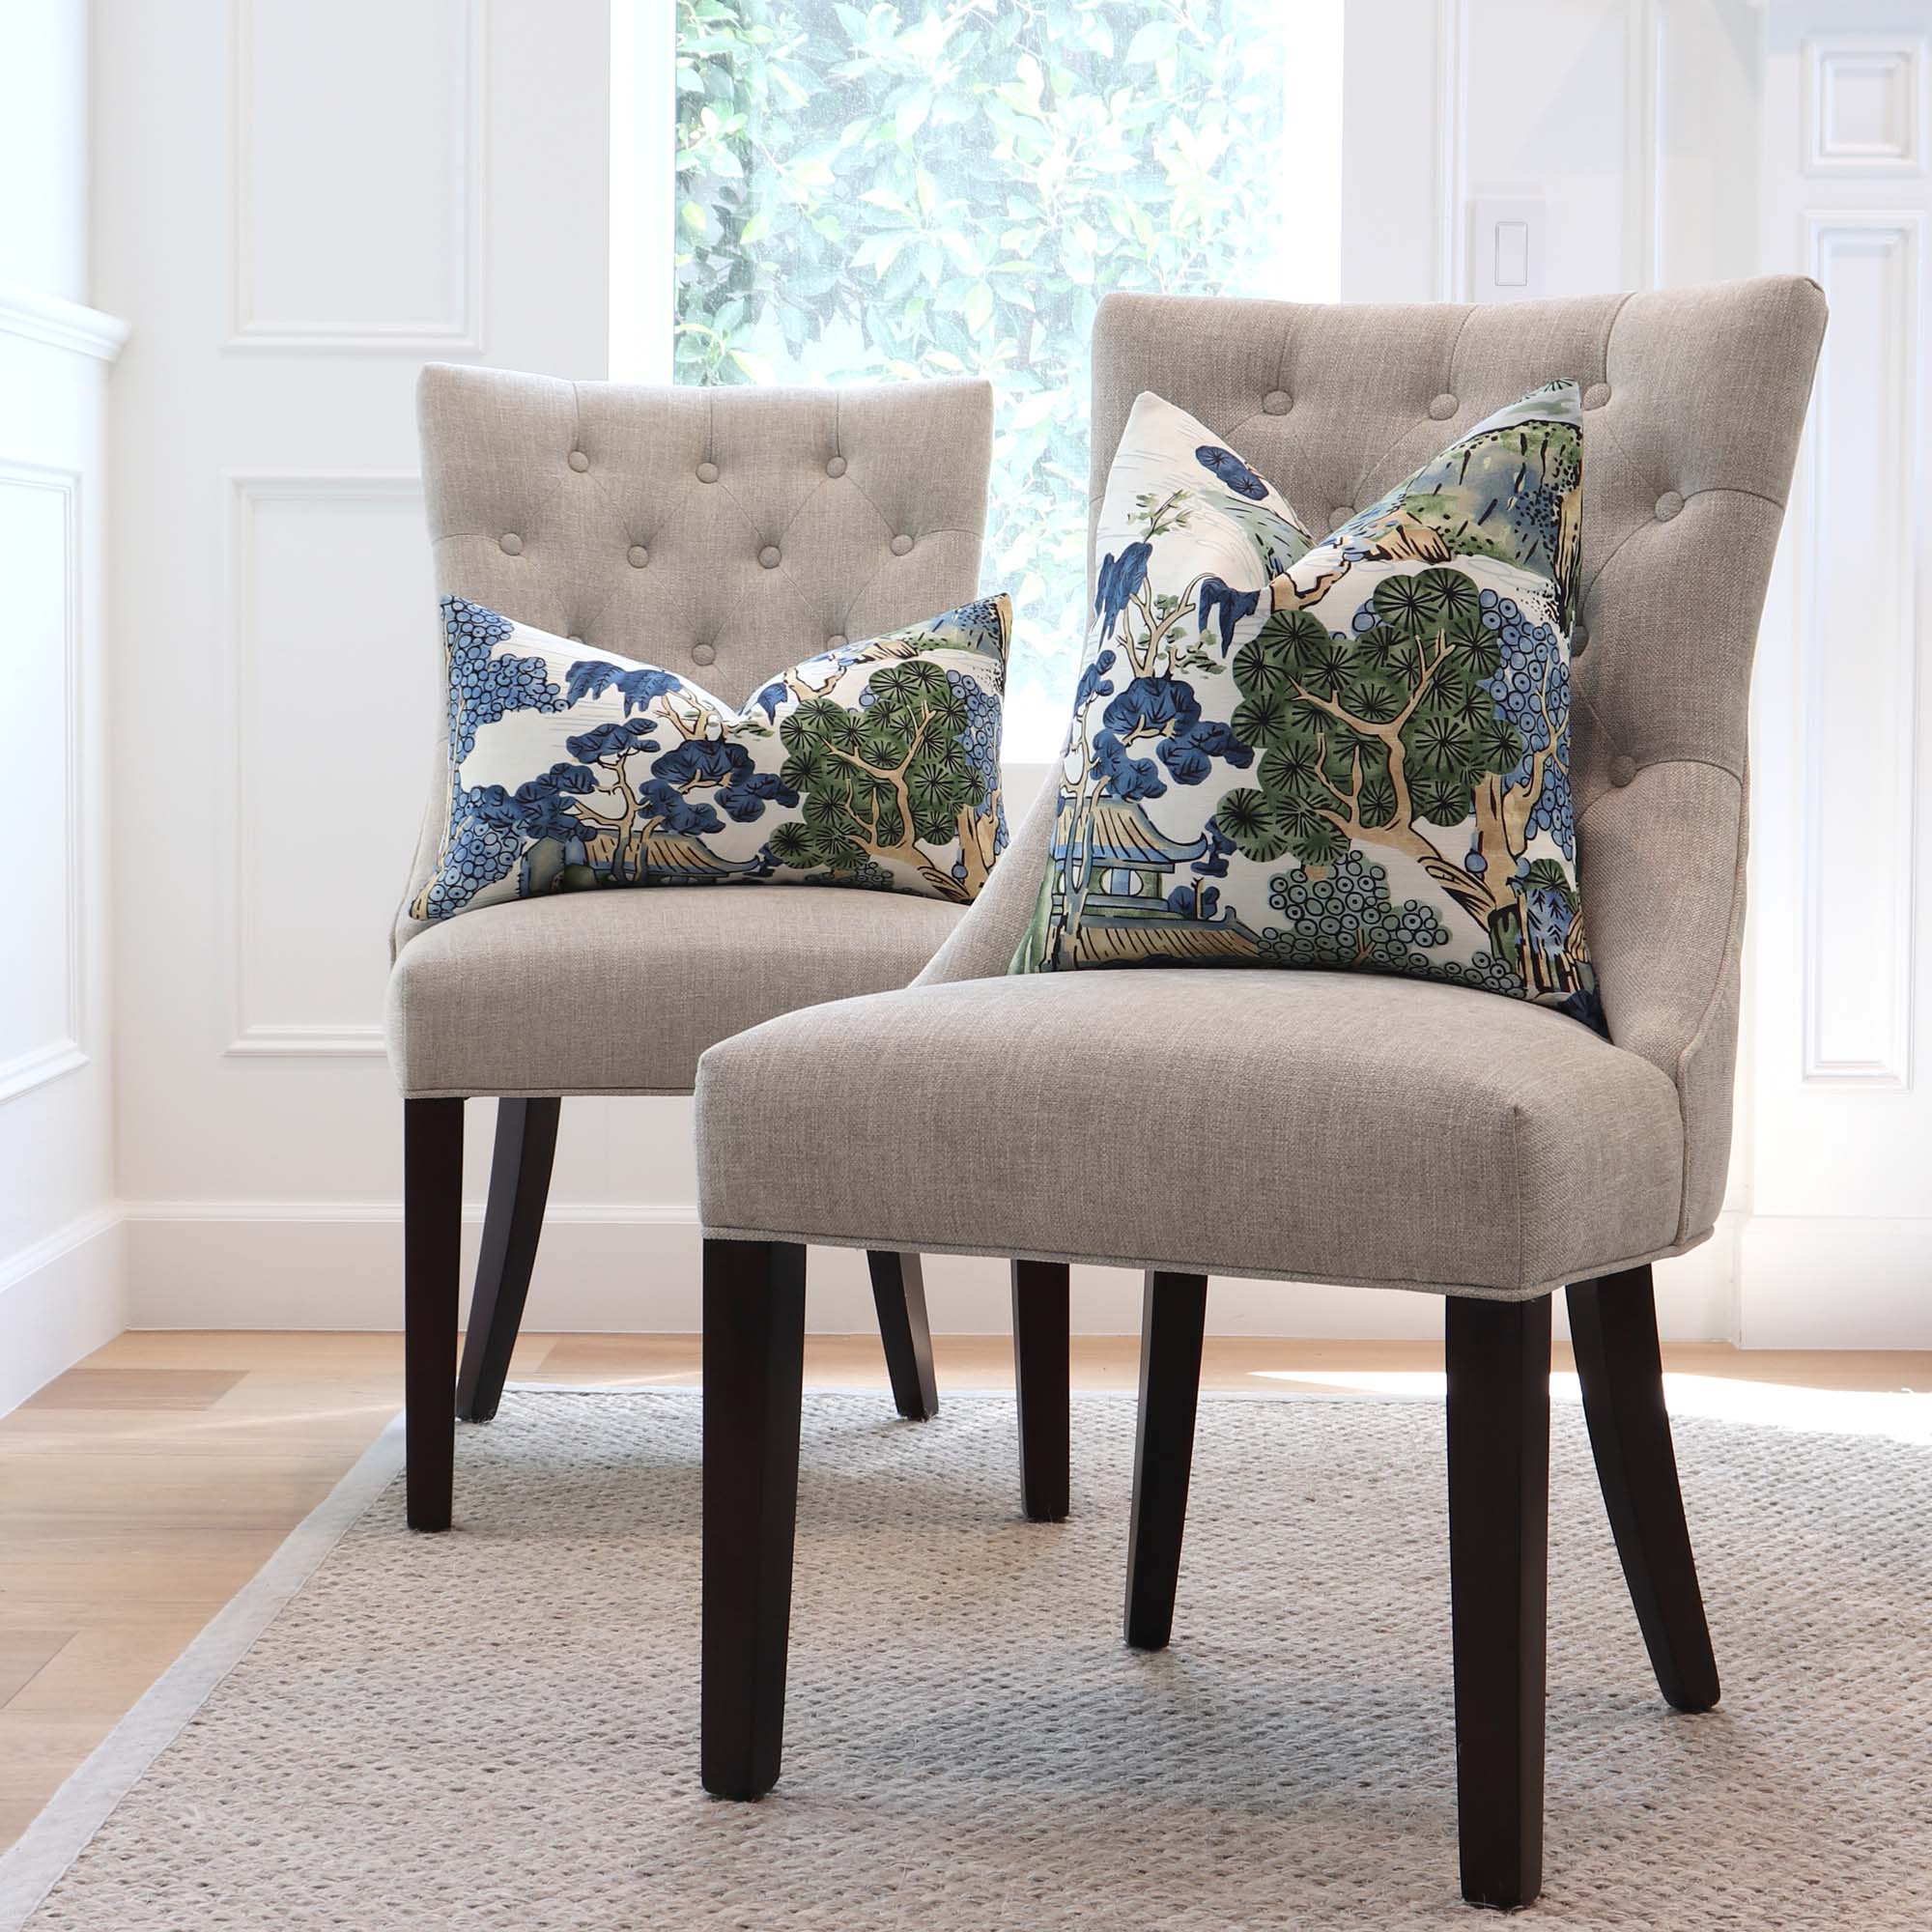 https://www.chloeandolive.com/cdn/shop/products/Thibaut-Asian-Scenic-Chinoiserie-Blue-Green-Designer-Luxury-Decorative-Throw-Pillow-Cover-on-Chairs-in-Living-Room_5000x.jpg?v=1648958836